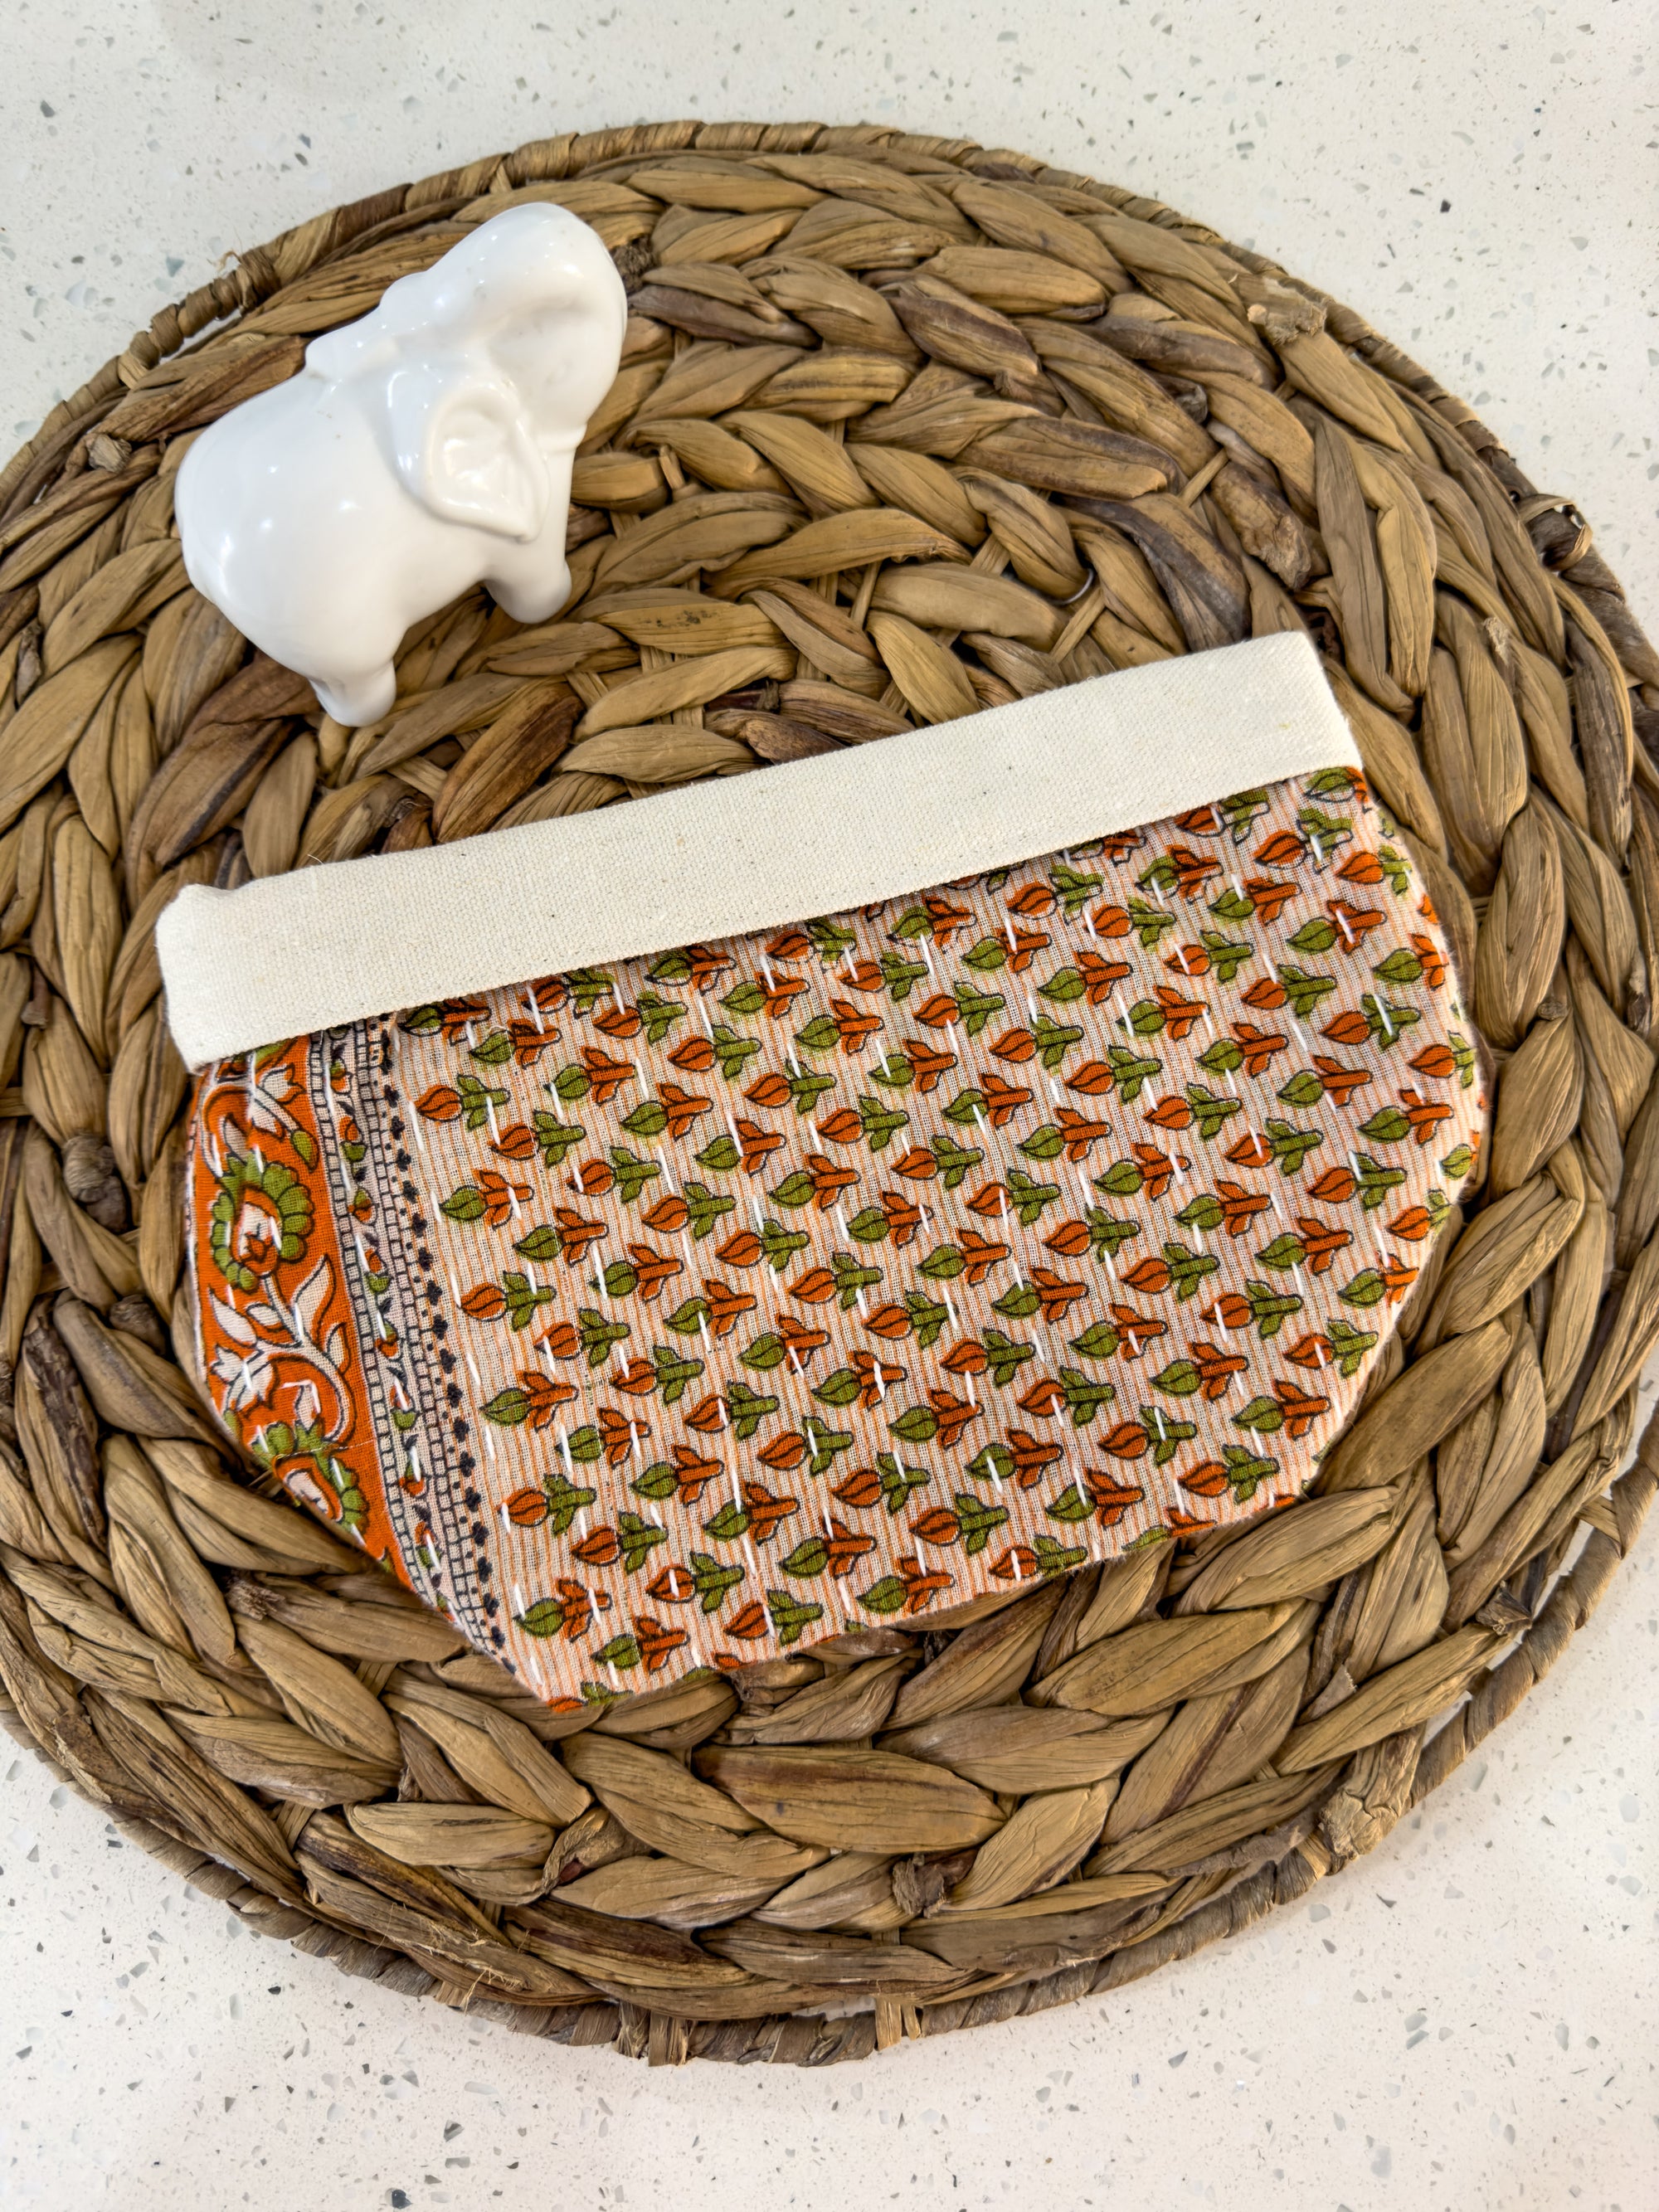 a small purse sitting on top of a wicker basket